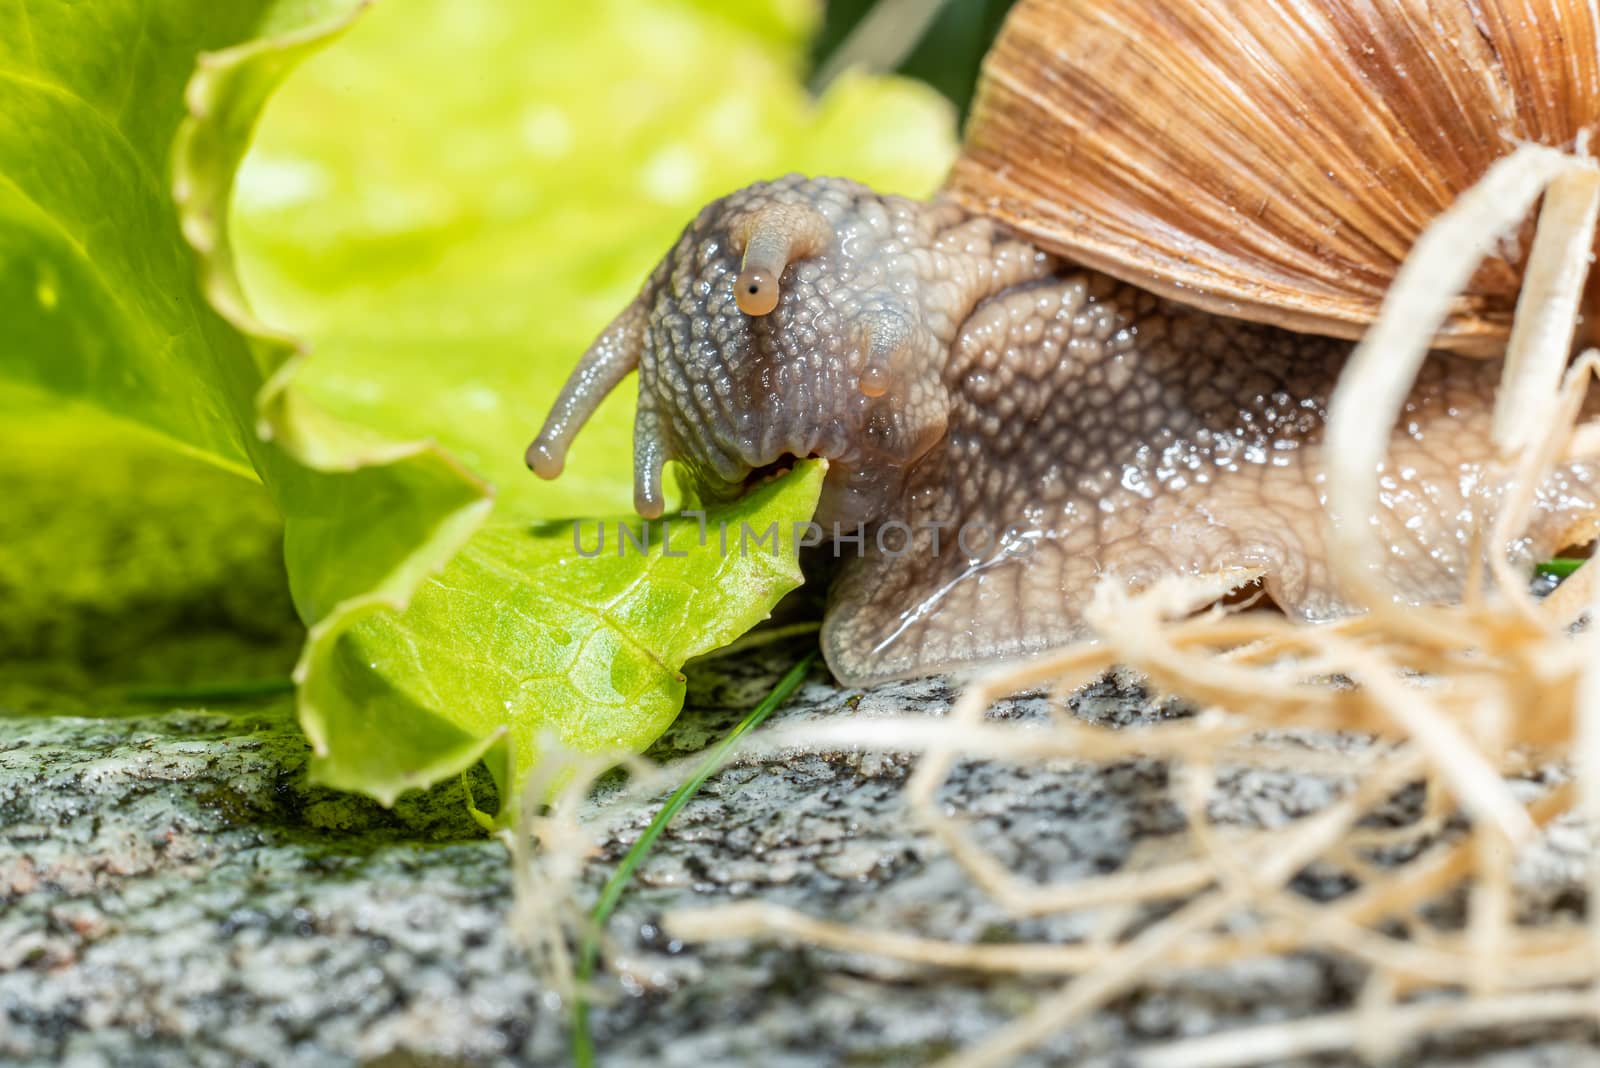 Macro close-up of a Burgundy snail eating a lettuce leaf - biting of a piece of the leaf by Umtsga